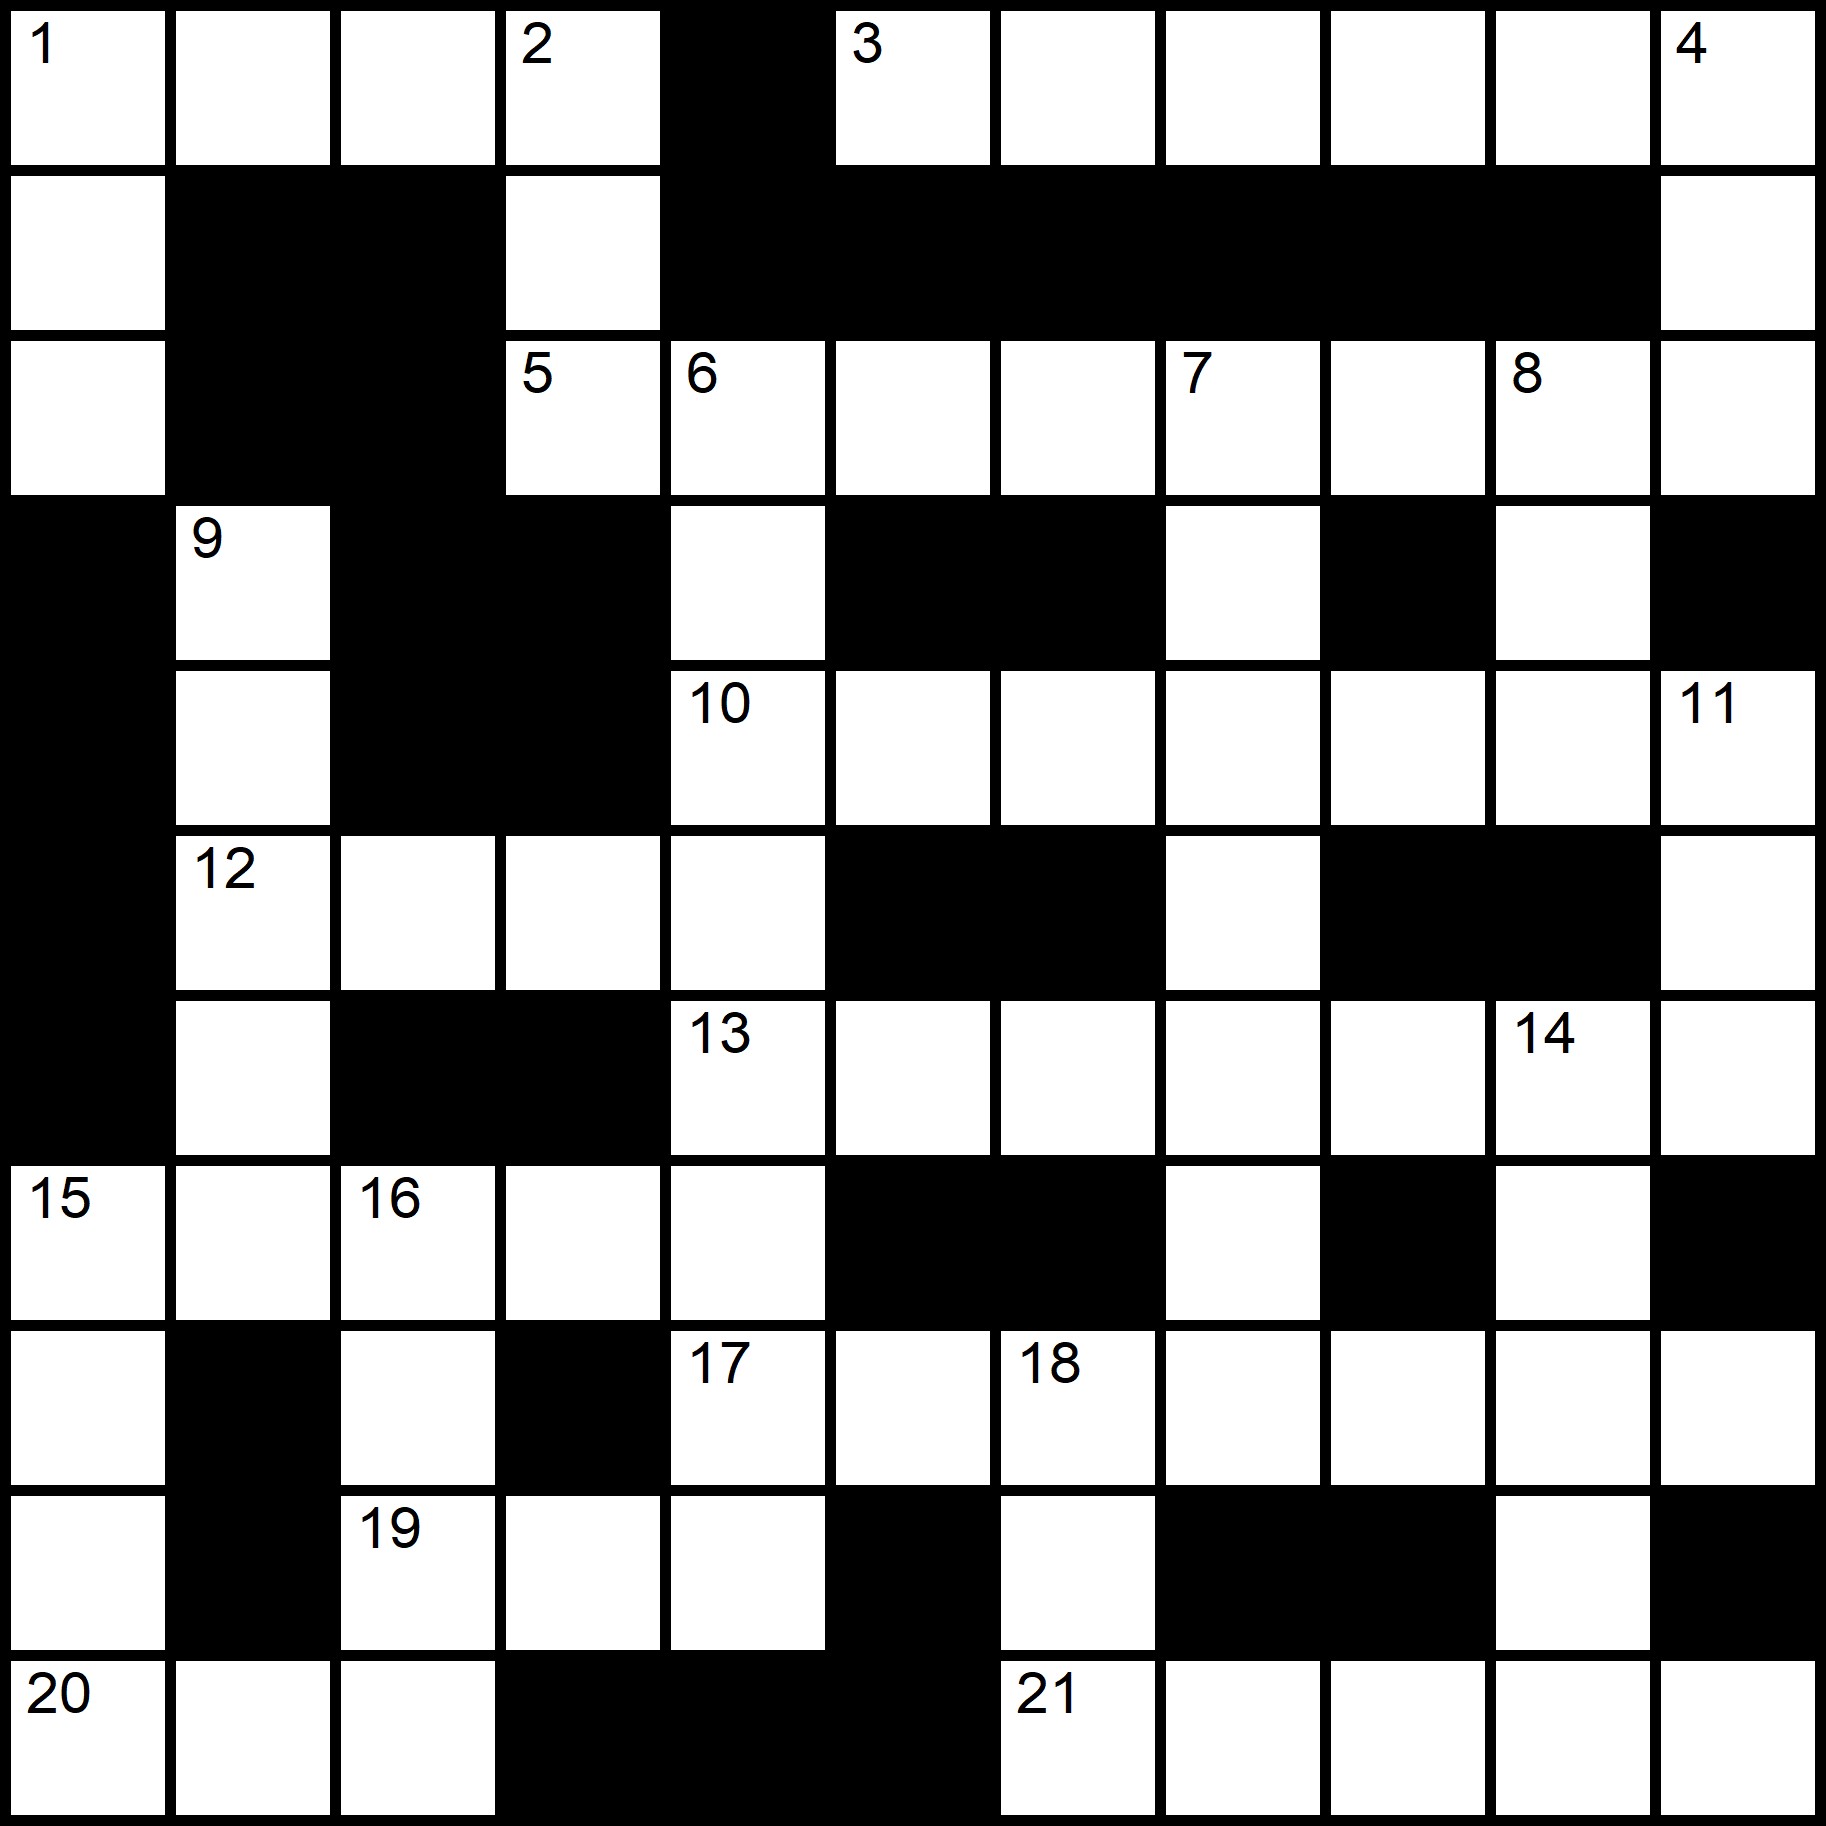 Second in a new series of easy printable crossword puzzles, click here.